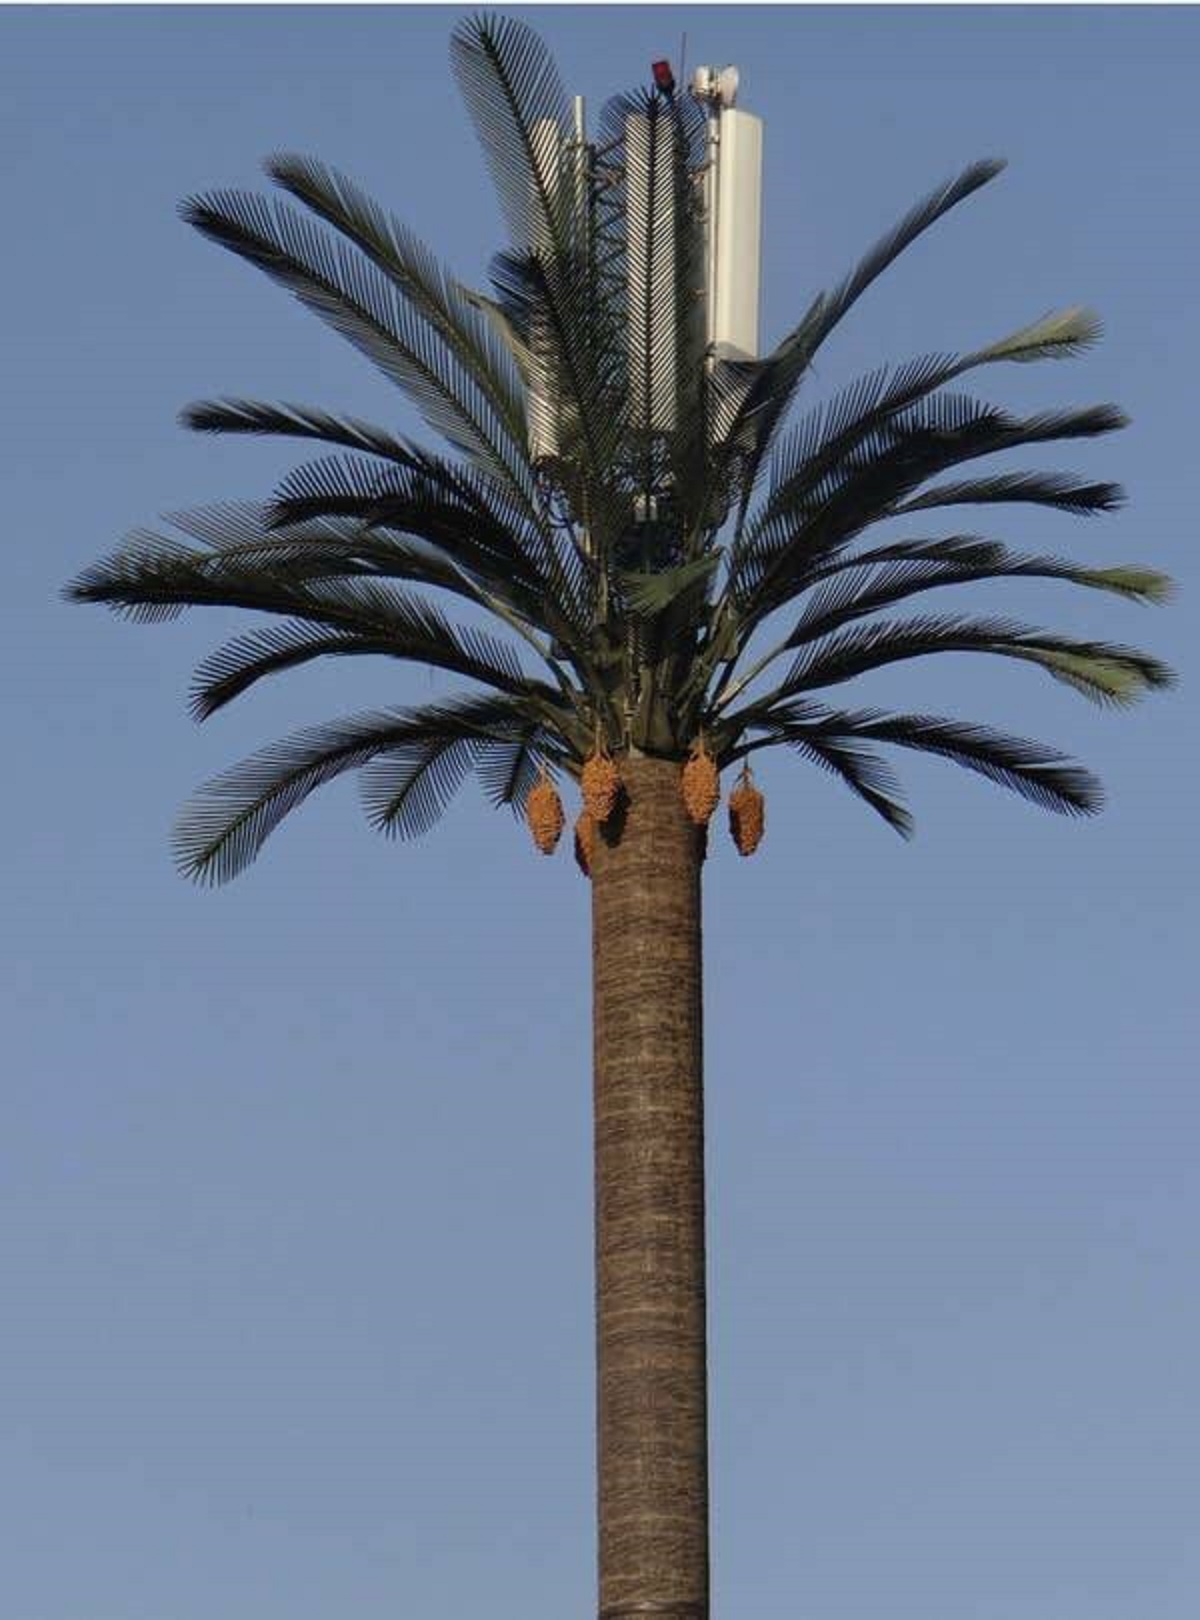 Morocco hides ugly utility poles under much prettier fake palm trees.